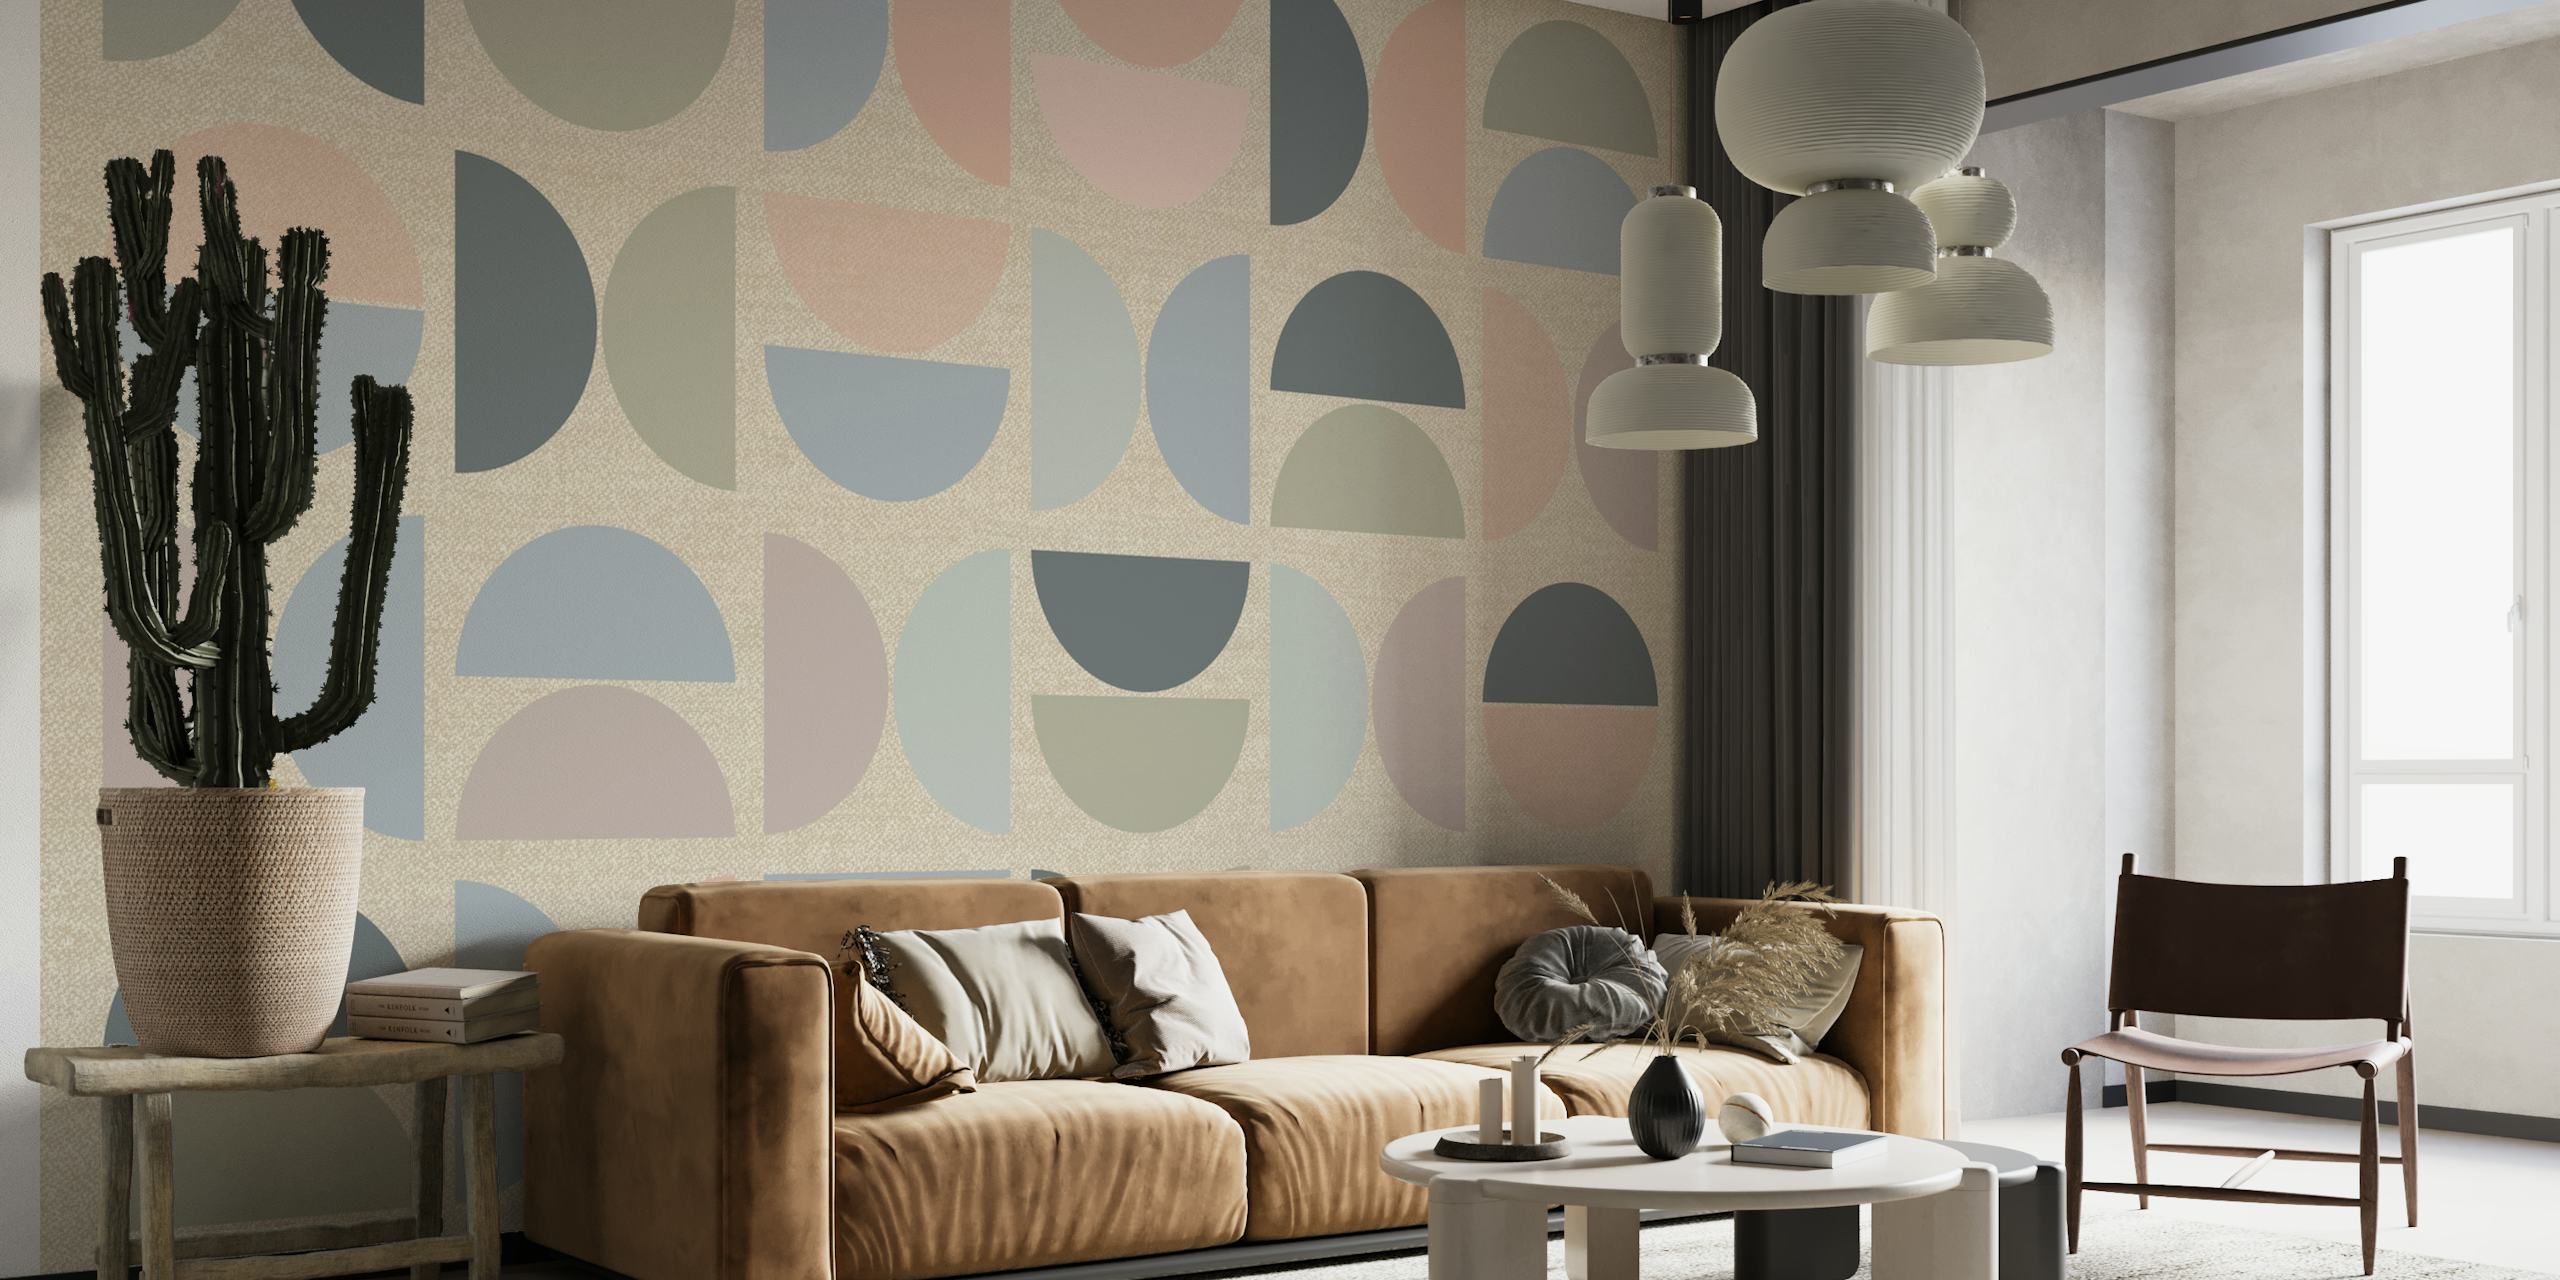 Muted Pastel Bauhaus-style wall mural with geometric shapes in soft colors